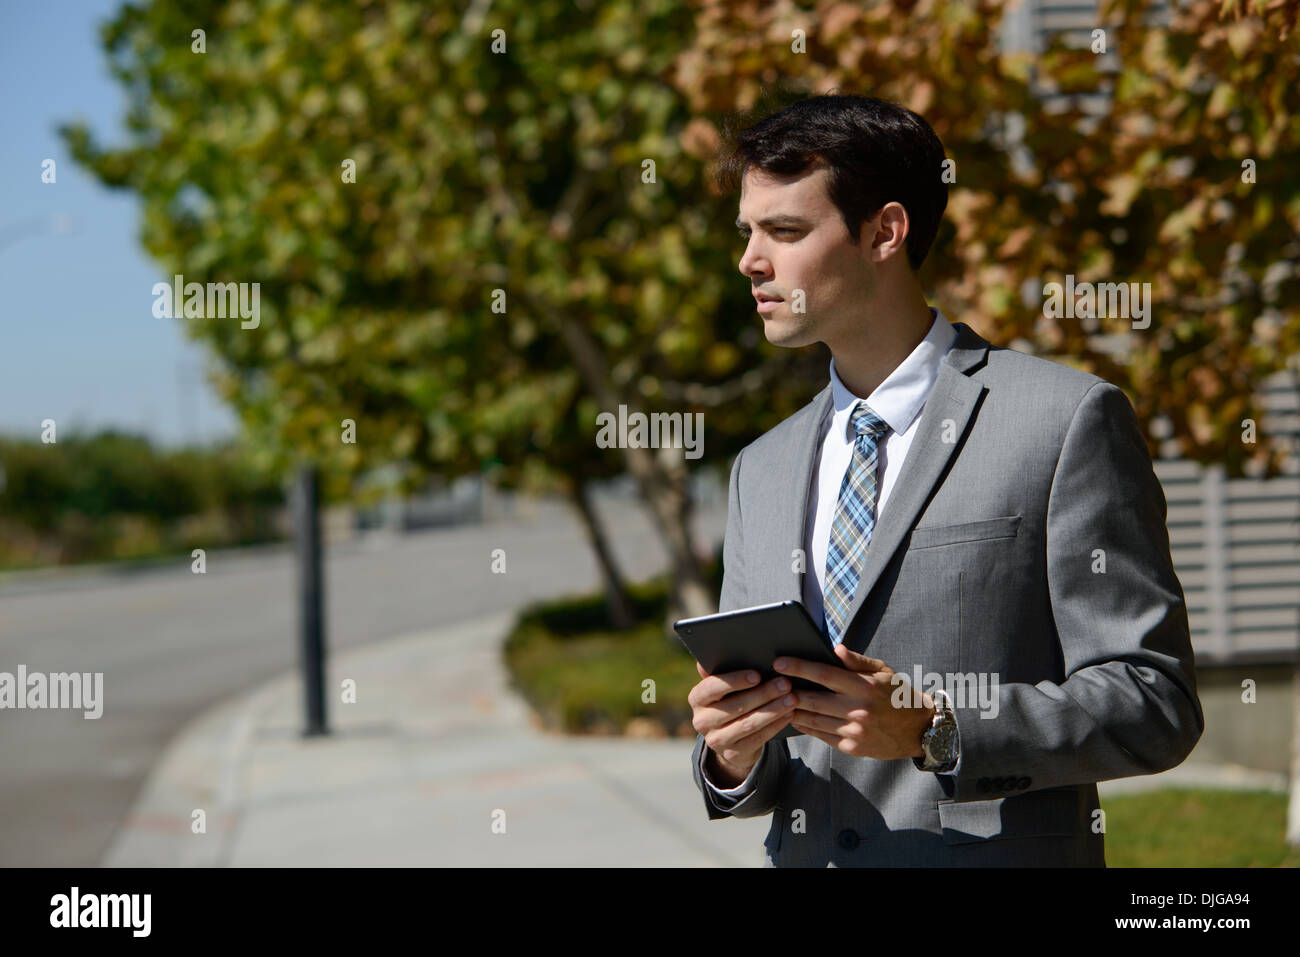 A young business man holding an ipad, tablet, looking away ambitiously. He is standing on a footpath in front of a few trees. Stock Photo